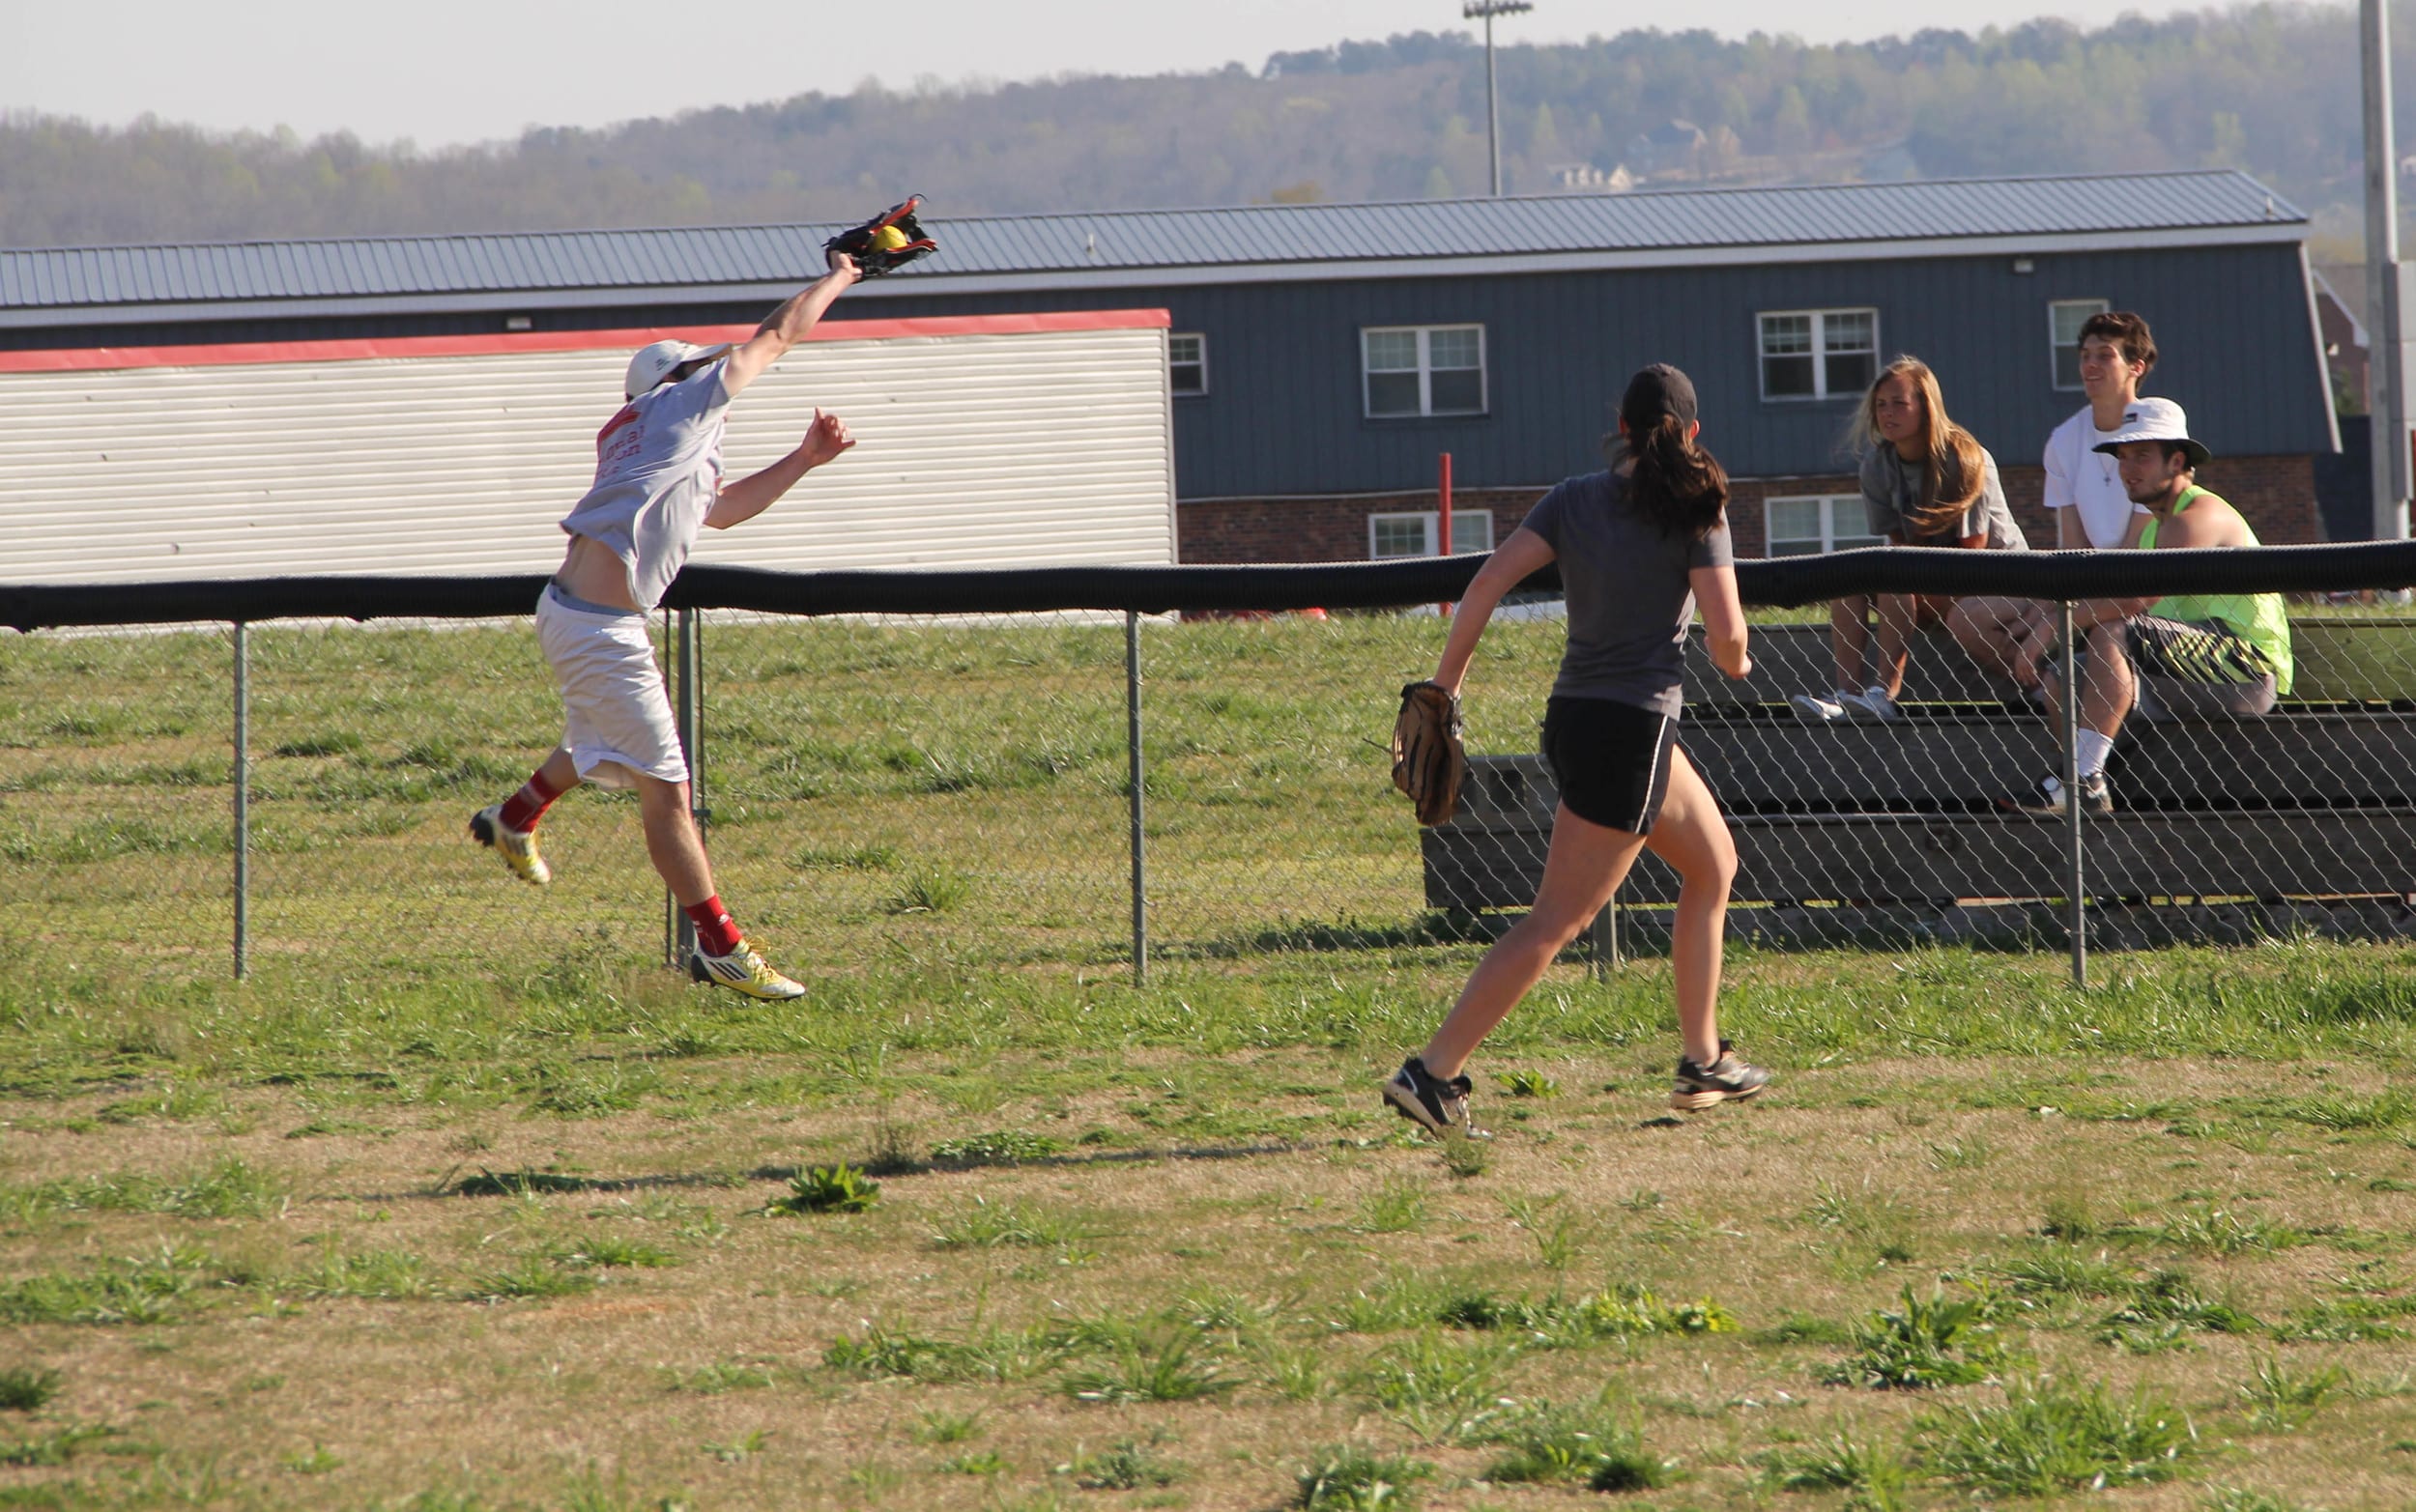  Bradley Hall leaps to catch a ball deep outfield.&nbsp; 